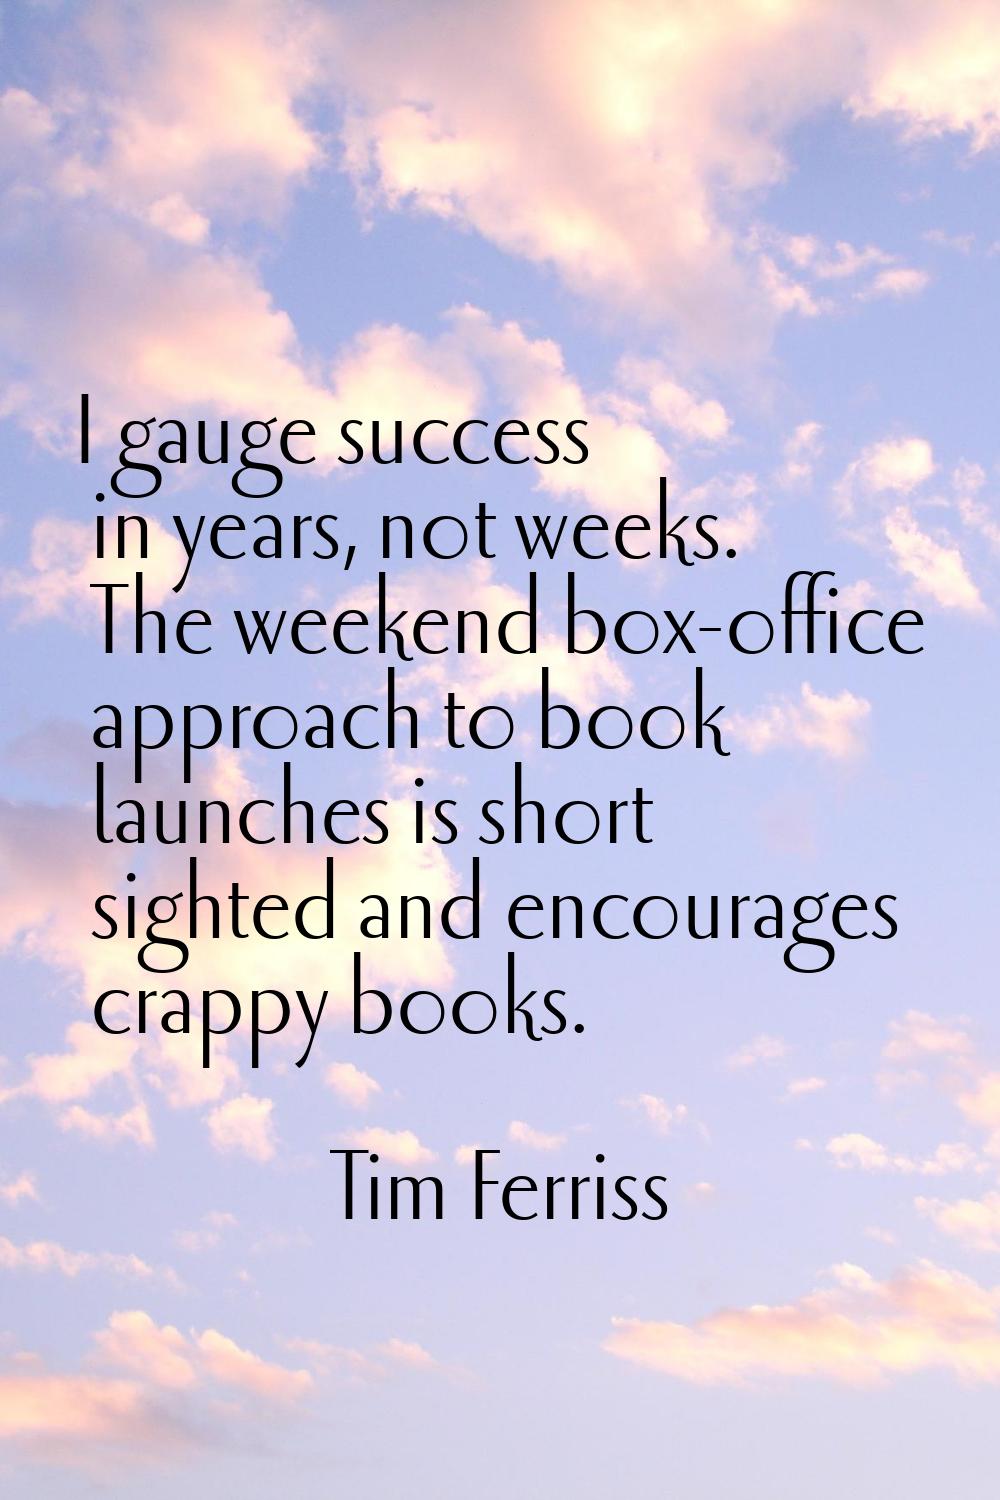 I gauge success in years, not weeks. The weekend box-office approach to book launches is short sigh